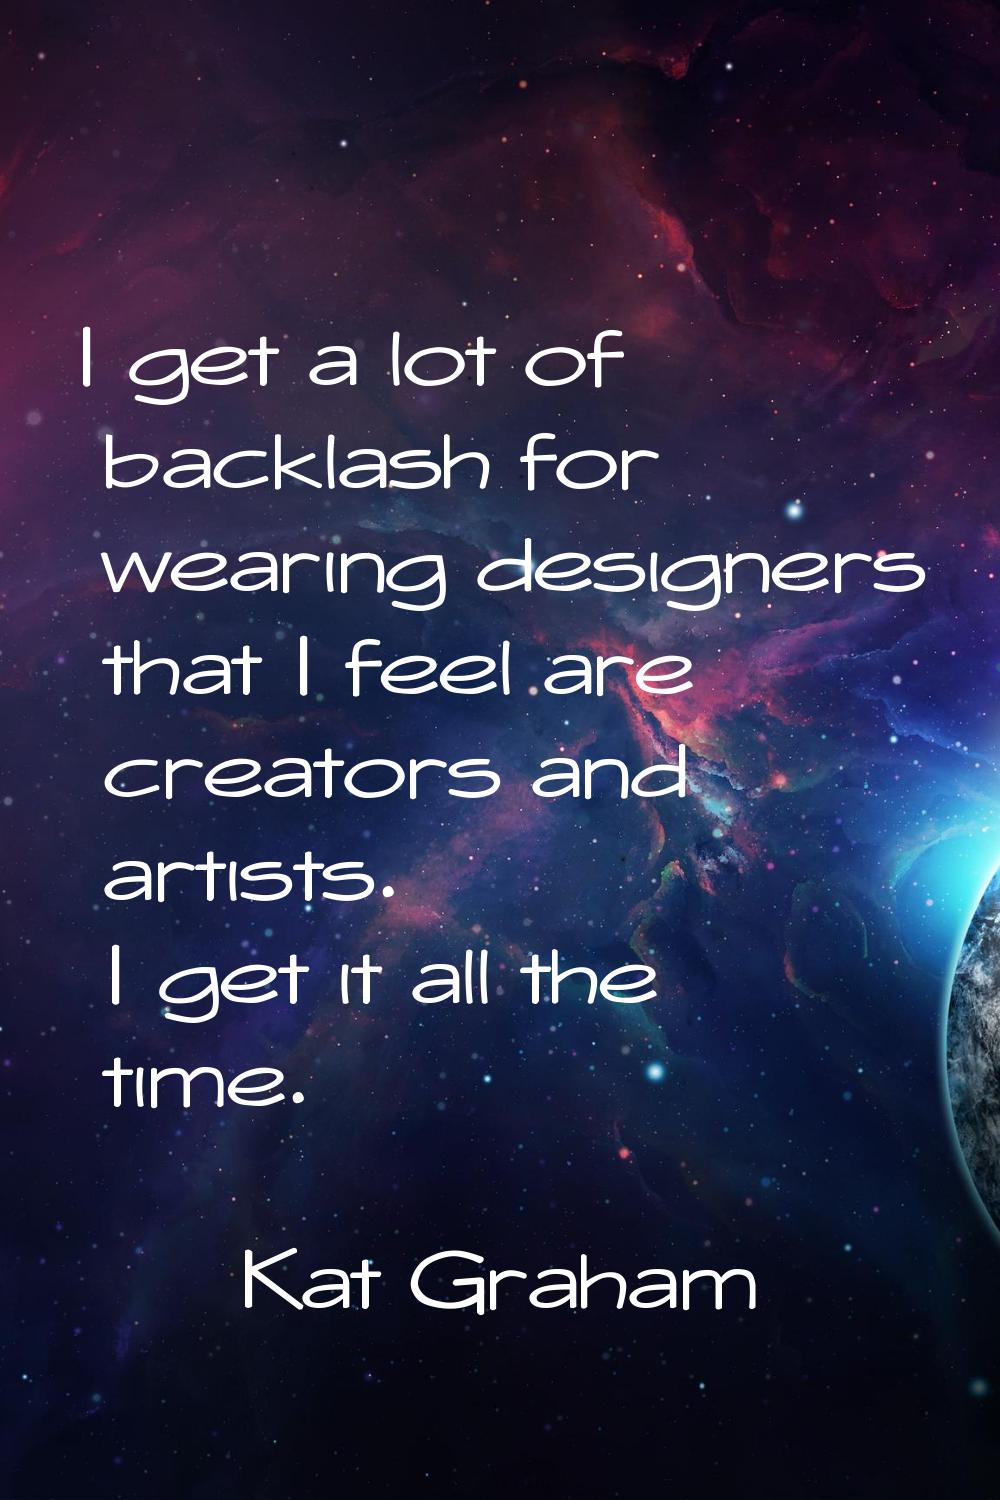 I get a lot of backlash for wearing designers that I feel are creators and artists. I get it all th